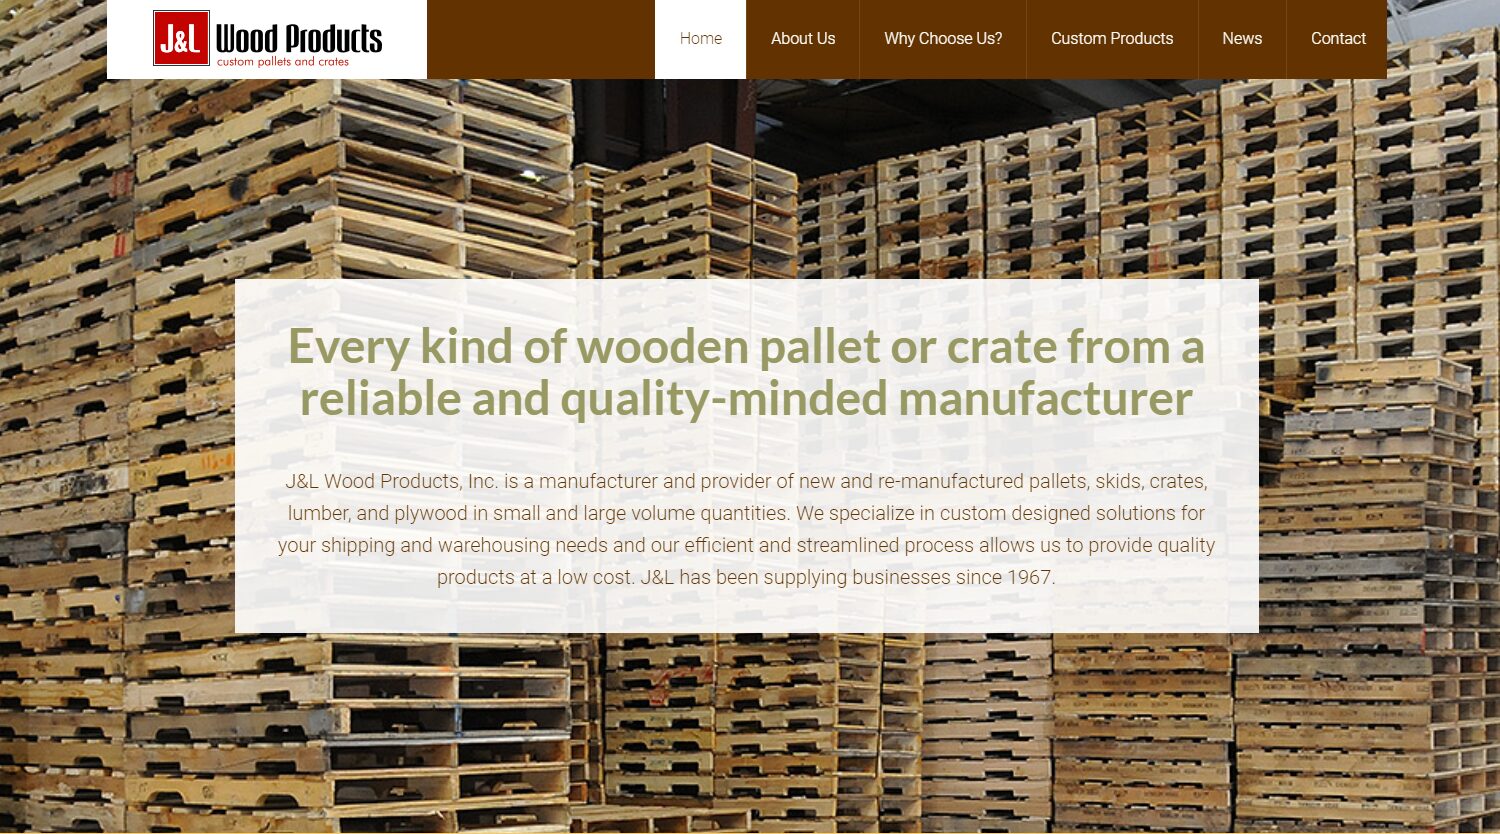 jl wood products